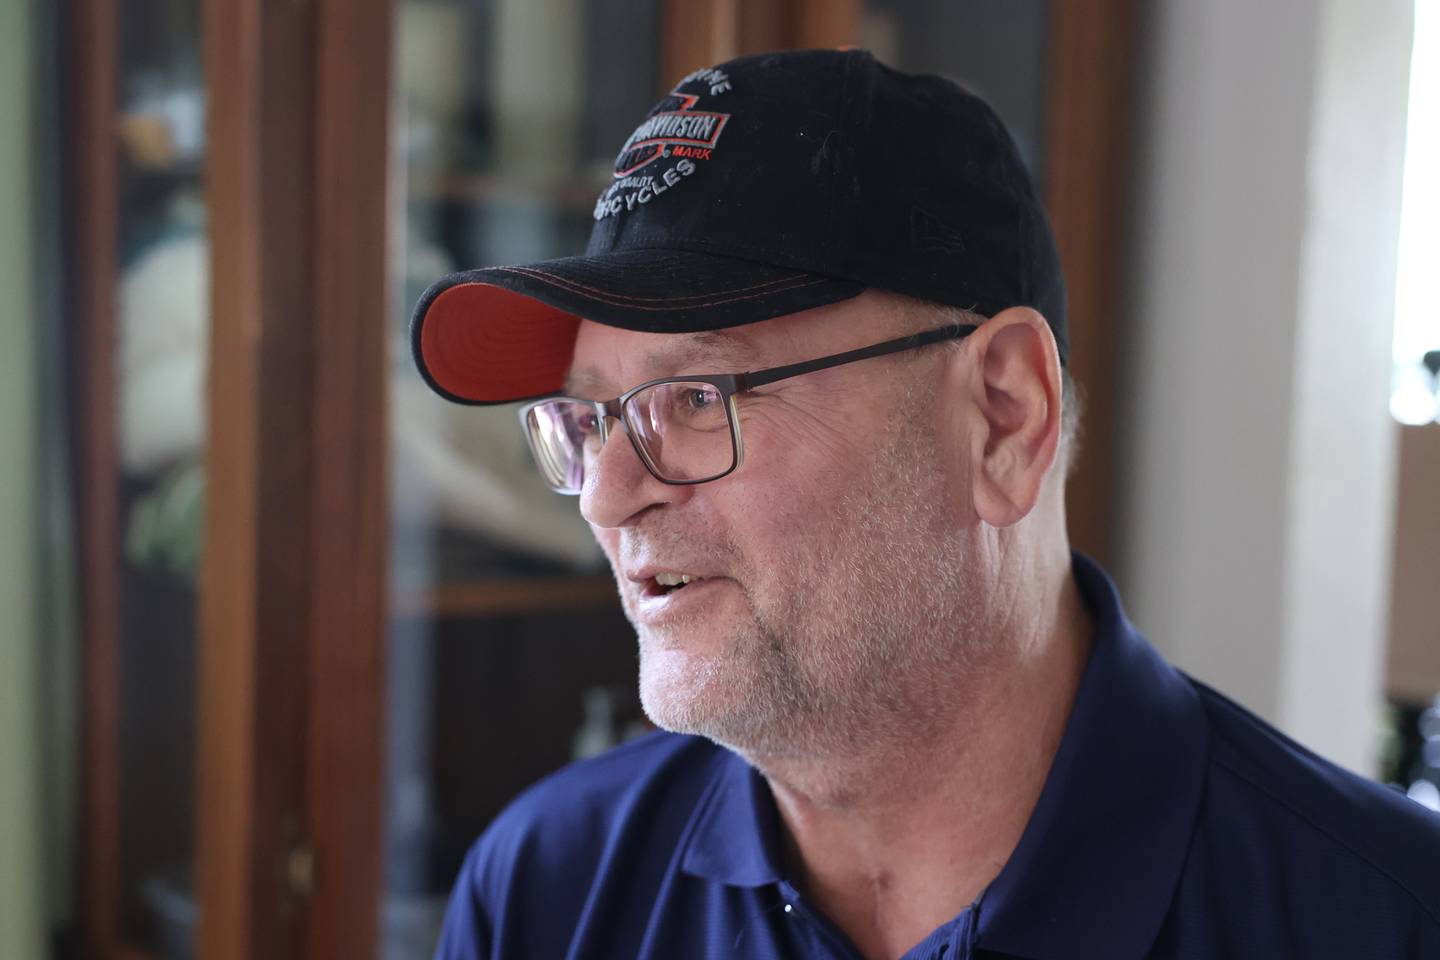 Tim Flannery share the best part of the morning is sitting with a cup of coffee reading the news paper. Nearly a year after Tim’s motorcycle accident that left him in critical condition, Tim is still recovering with the help of his son and wife. Wednesday, June 15, 2022 in Joliet.